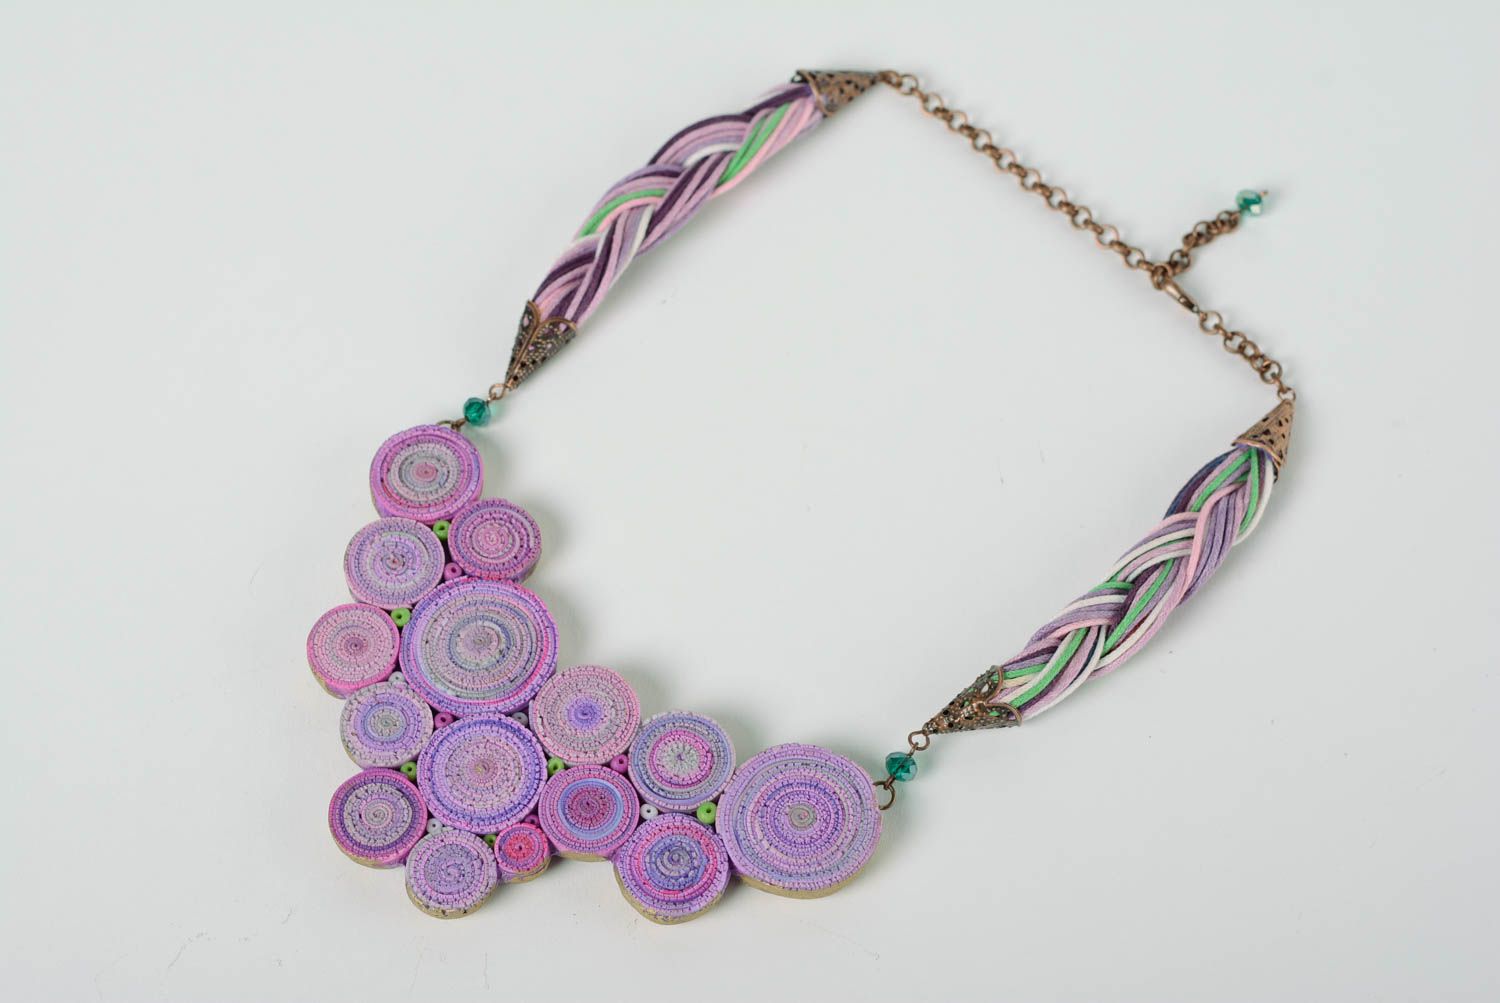 Handmade purple polymer clay necklace with cords Torn Edge photo 1